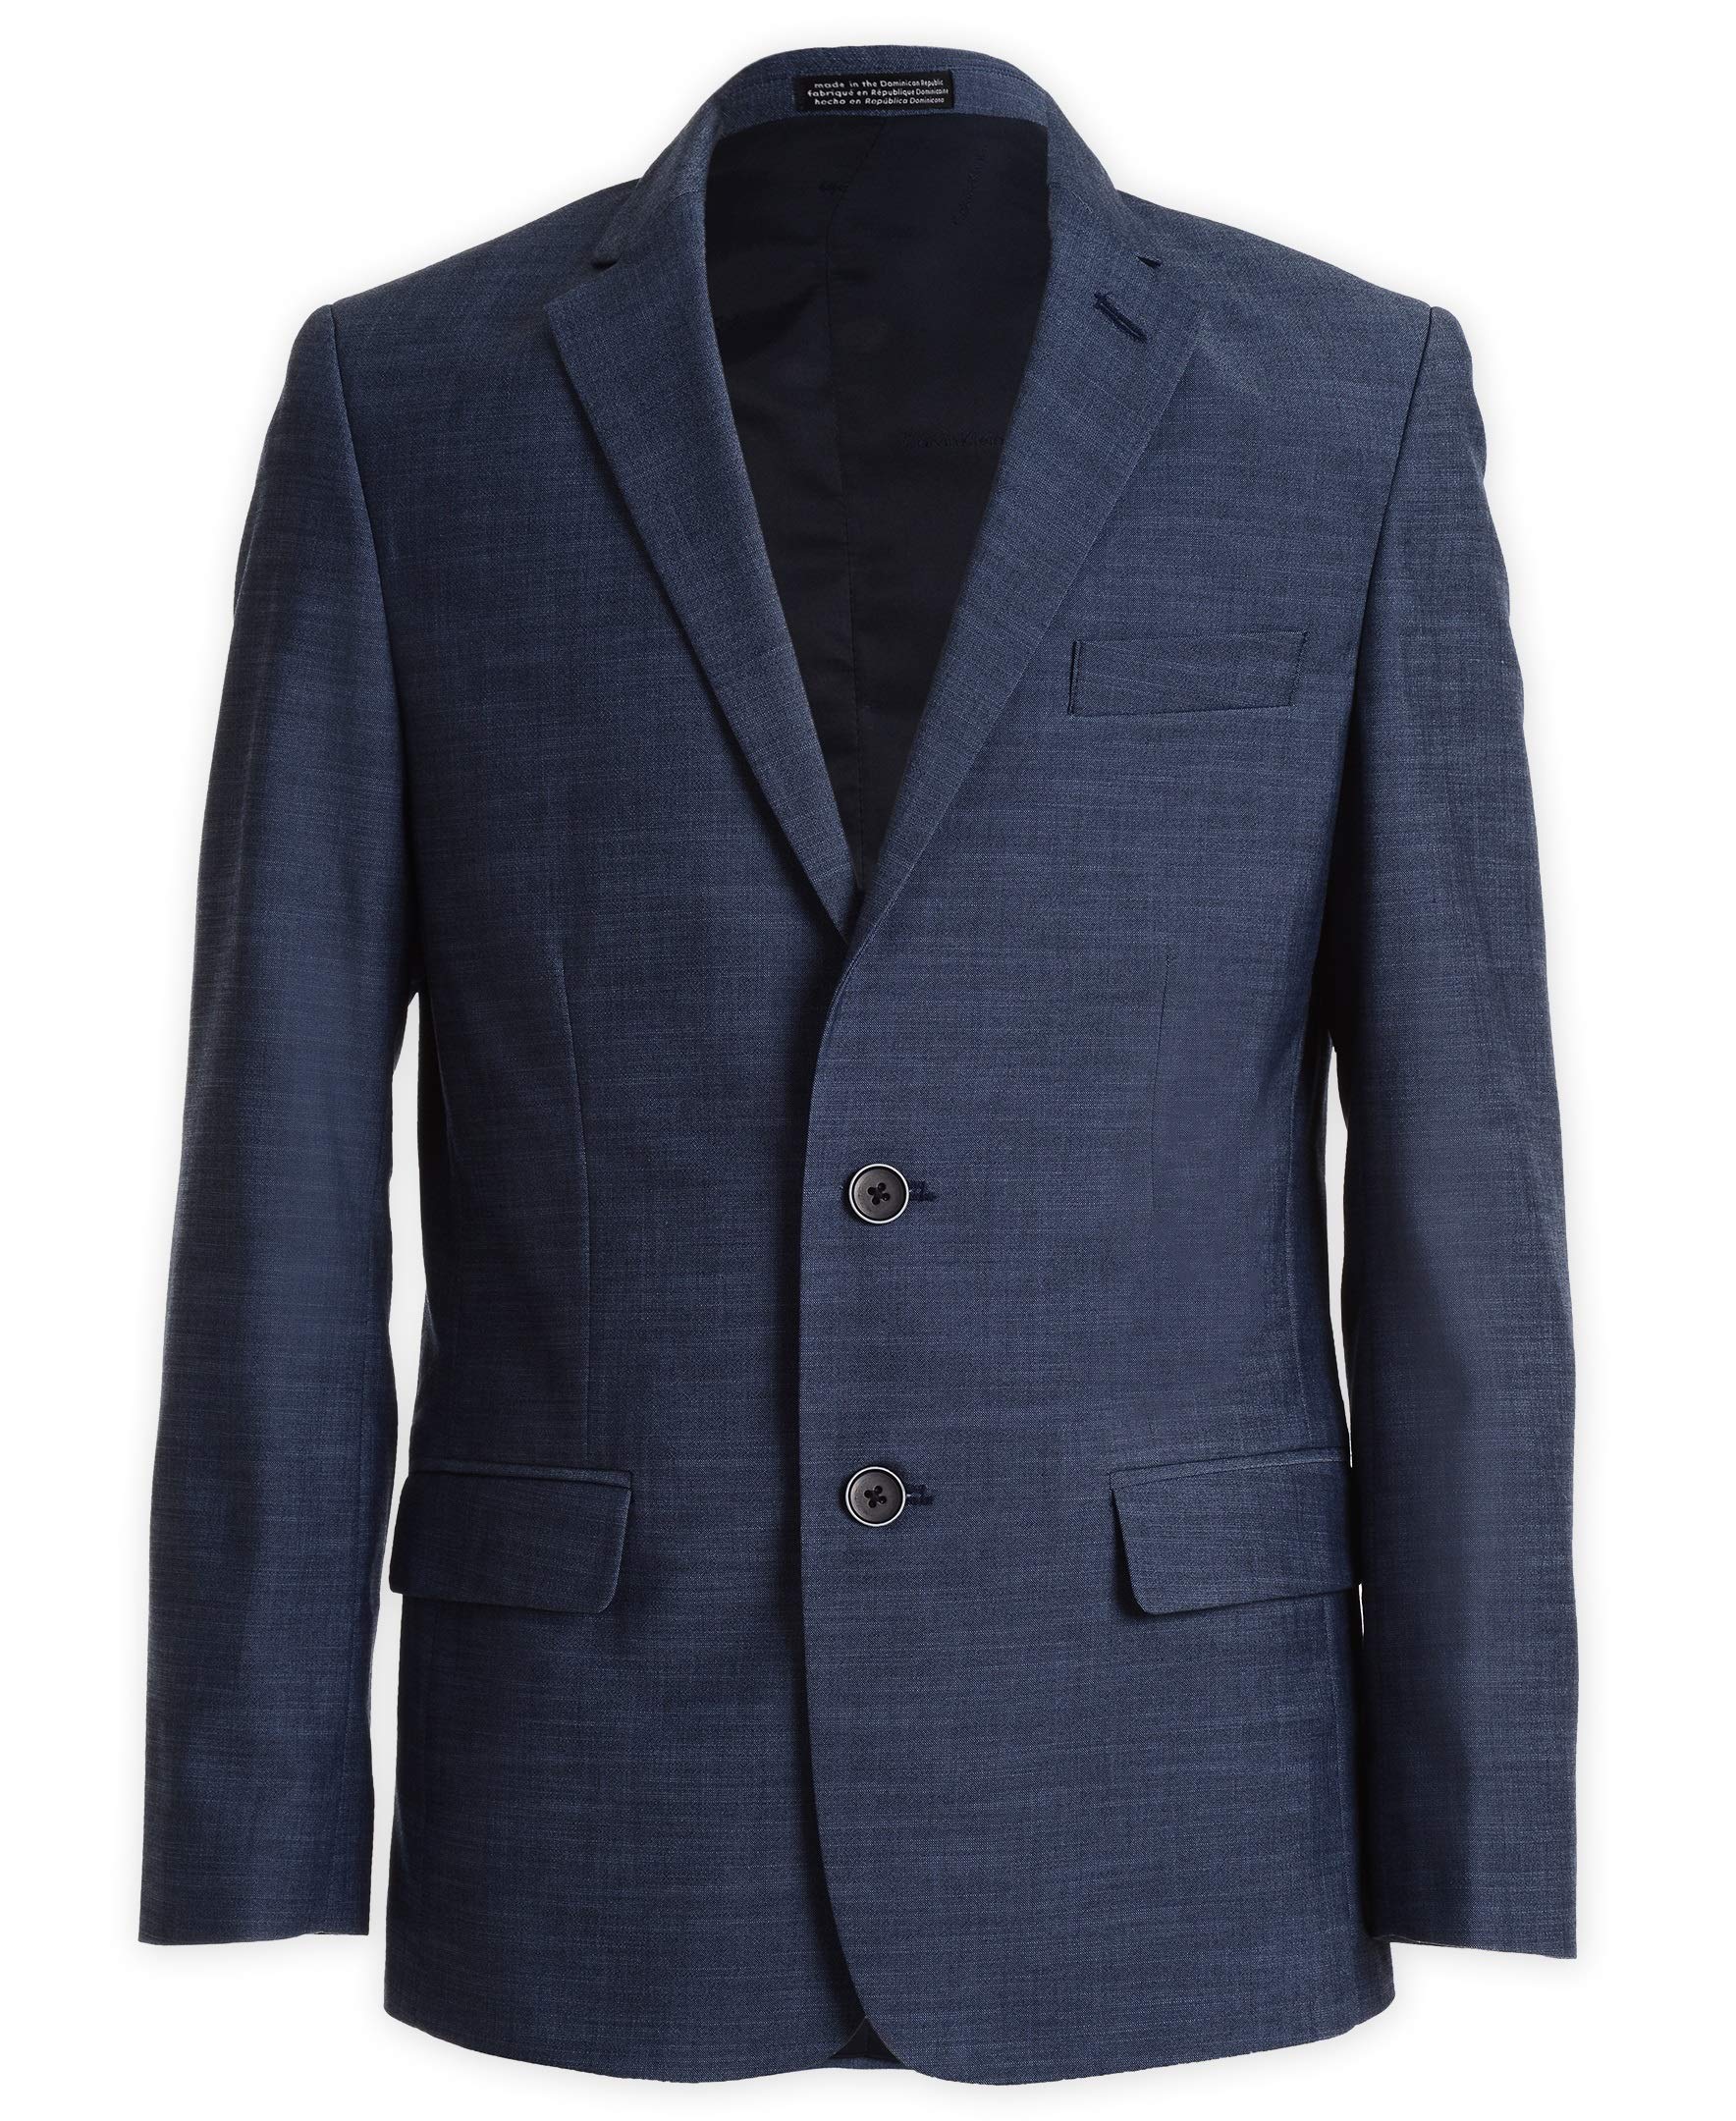 Calvin Klein Boys' Blazer Suit Jacket, 2-Button Single Breasted Closure, Buttoned Cuffs & Front Flap Pockets